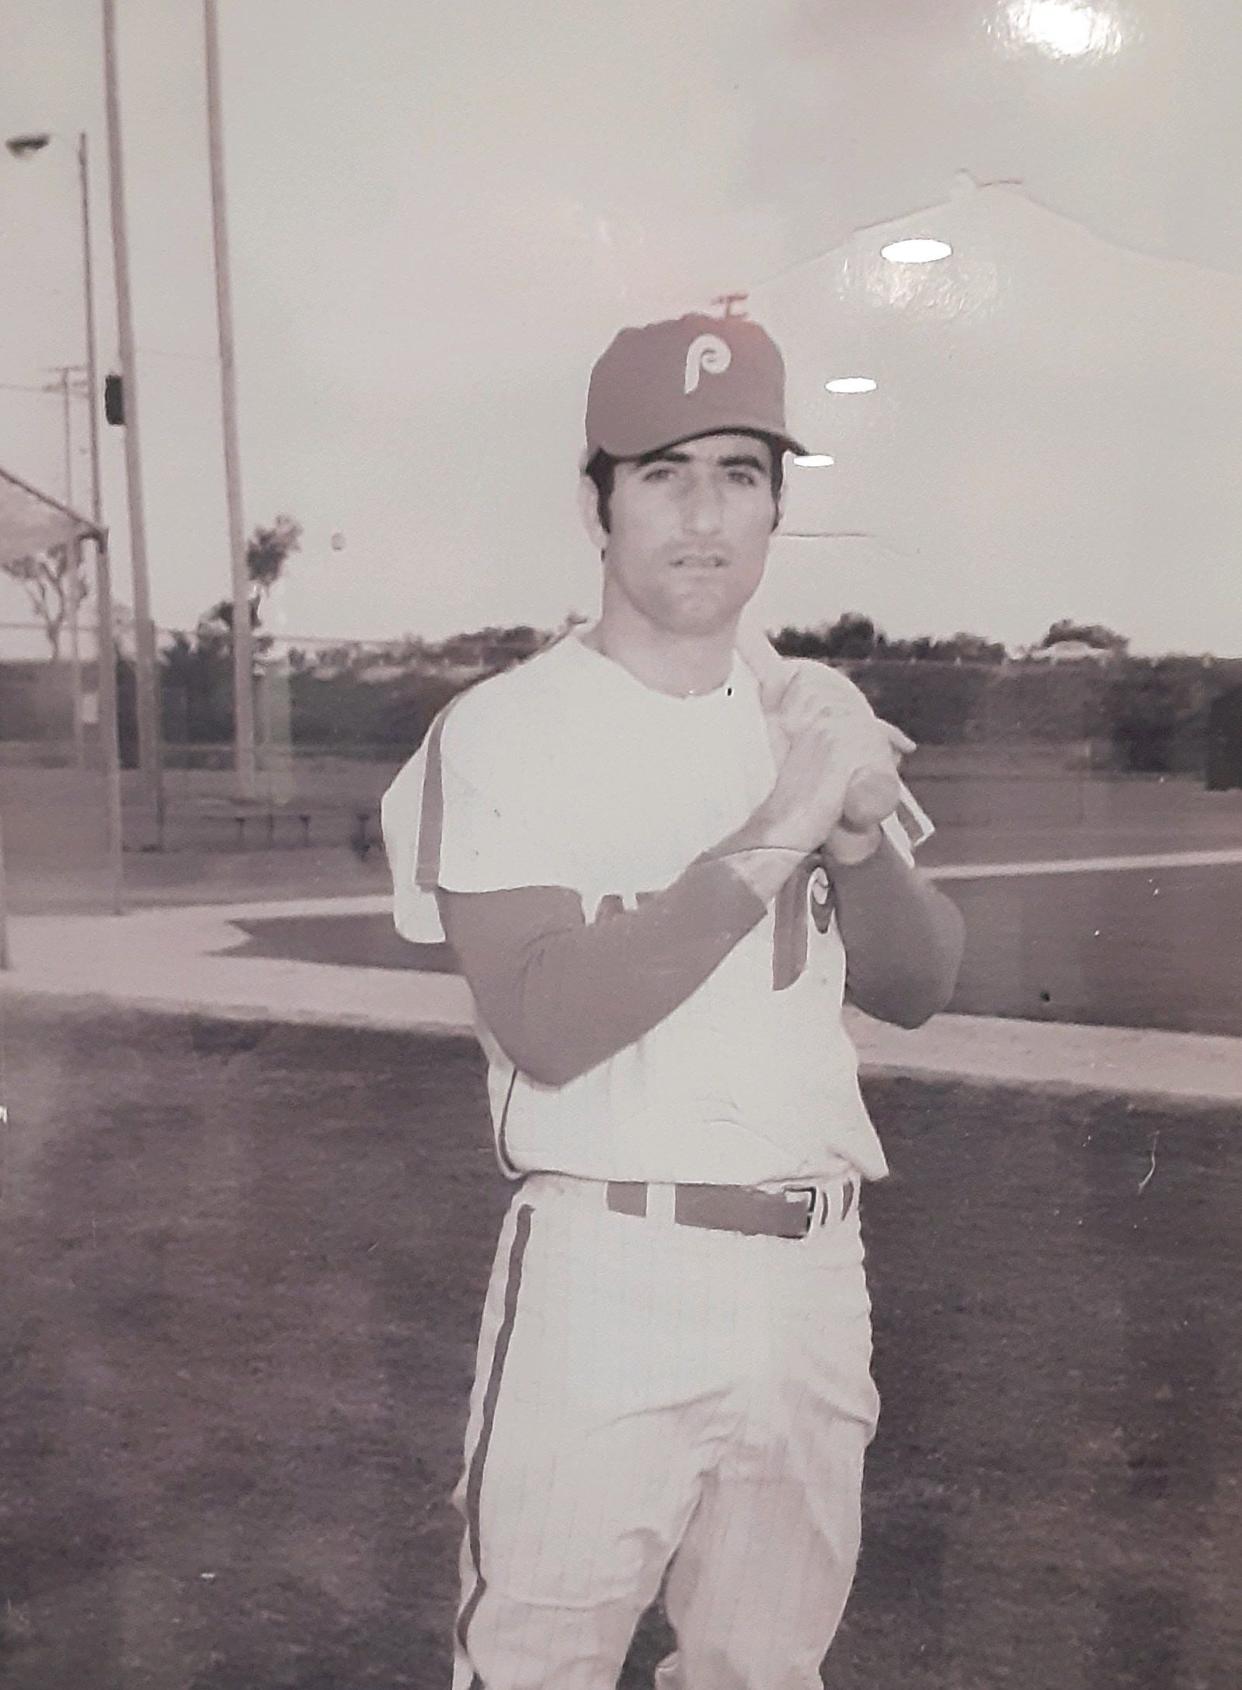 Rockford's Frank DeCastris, a 1961 graduate from St. Thomas, which merged with Muldoon to become Boylan in 1962, signed with the Philadelphia Phillies organization in 1971 after previously being in the Cleveland Indians organization.